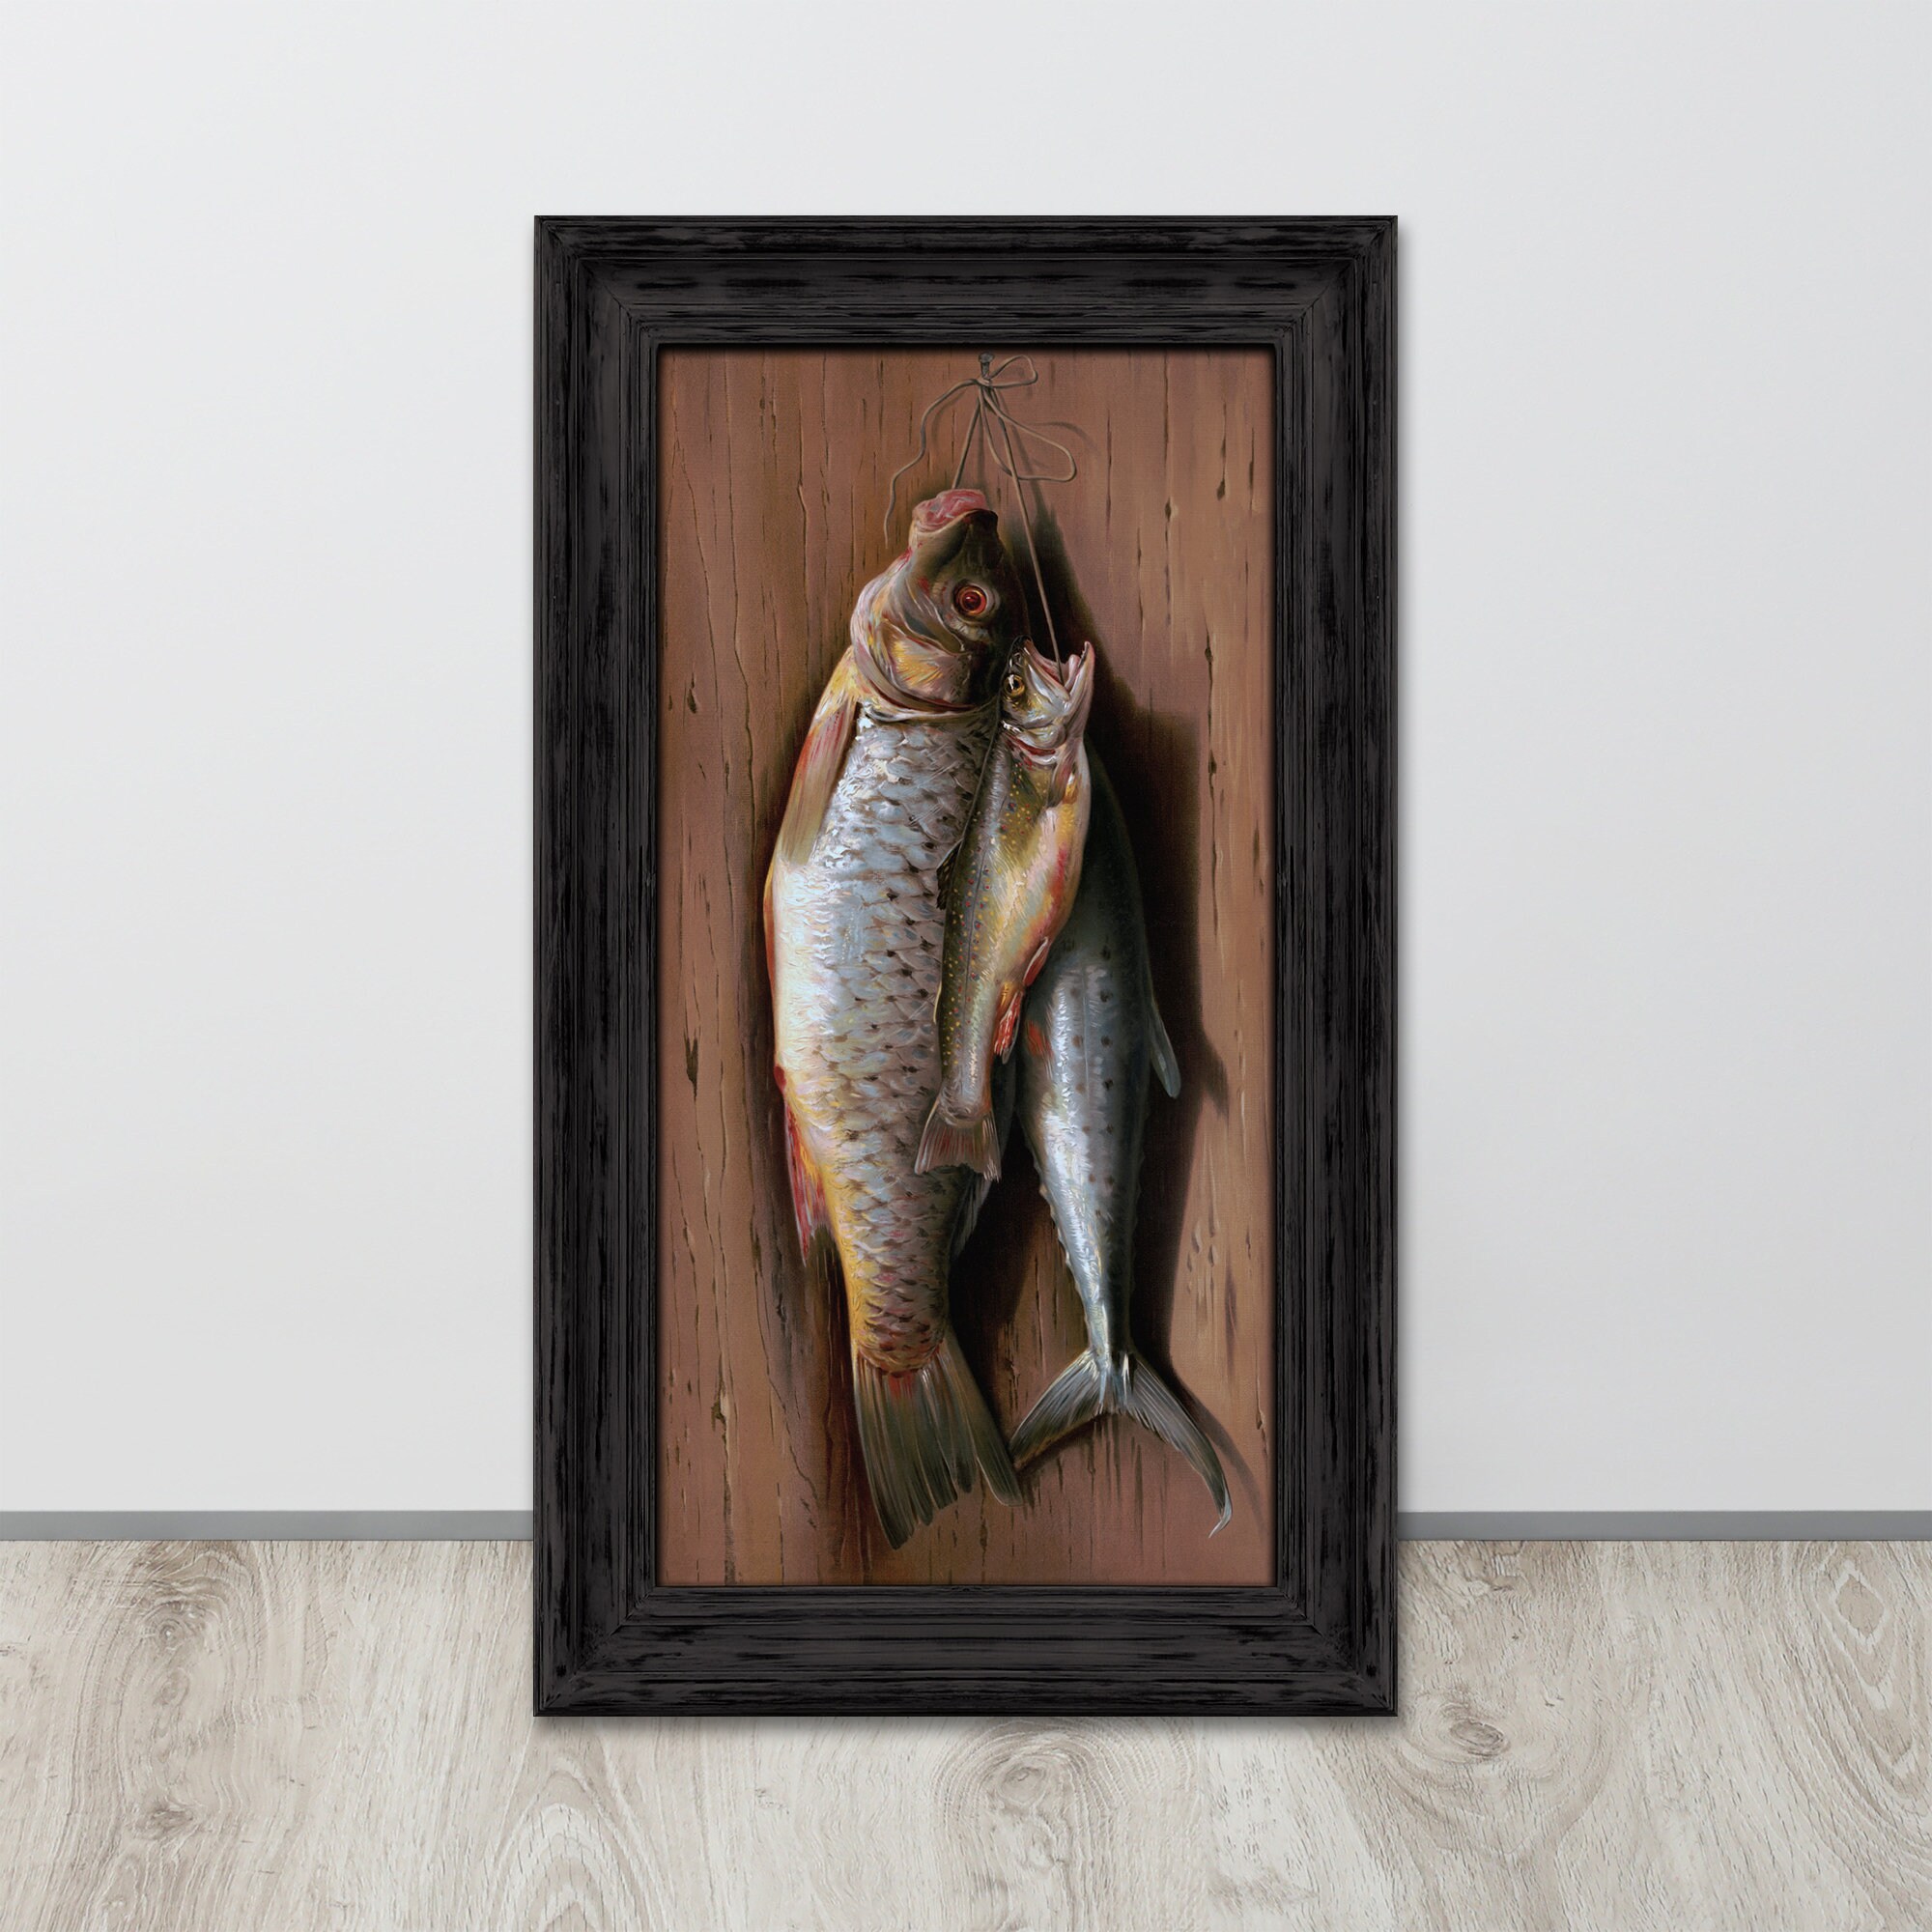 Vintage Fishing Wall Art Antique Fishing Oil Painting Catch of the